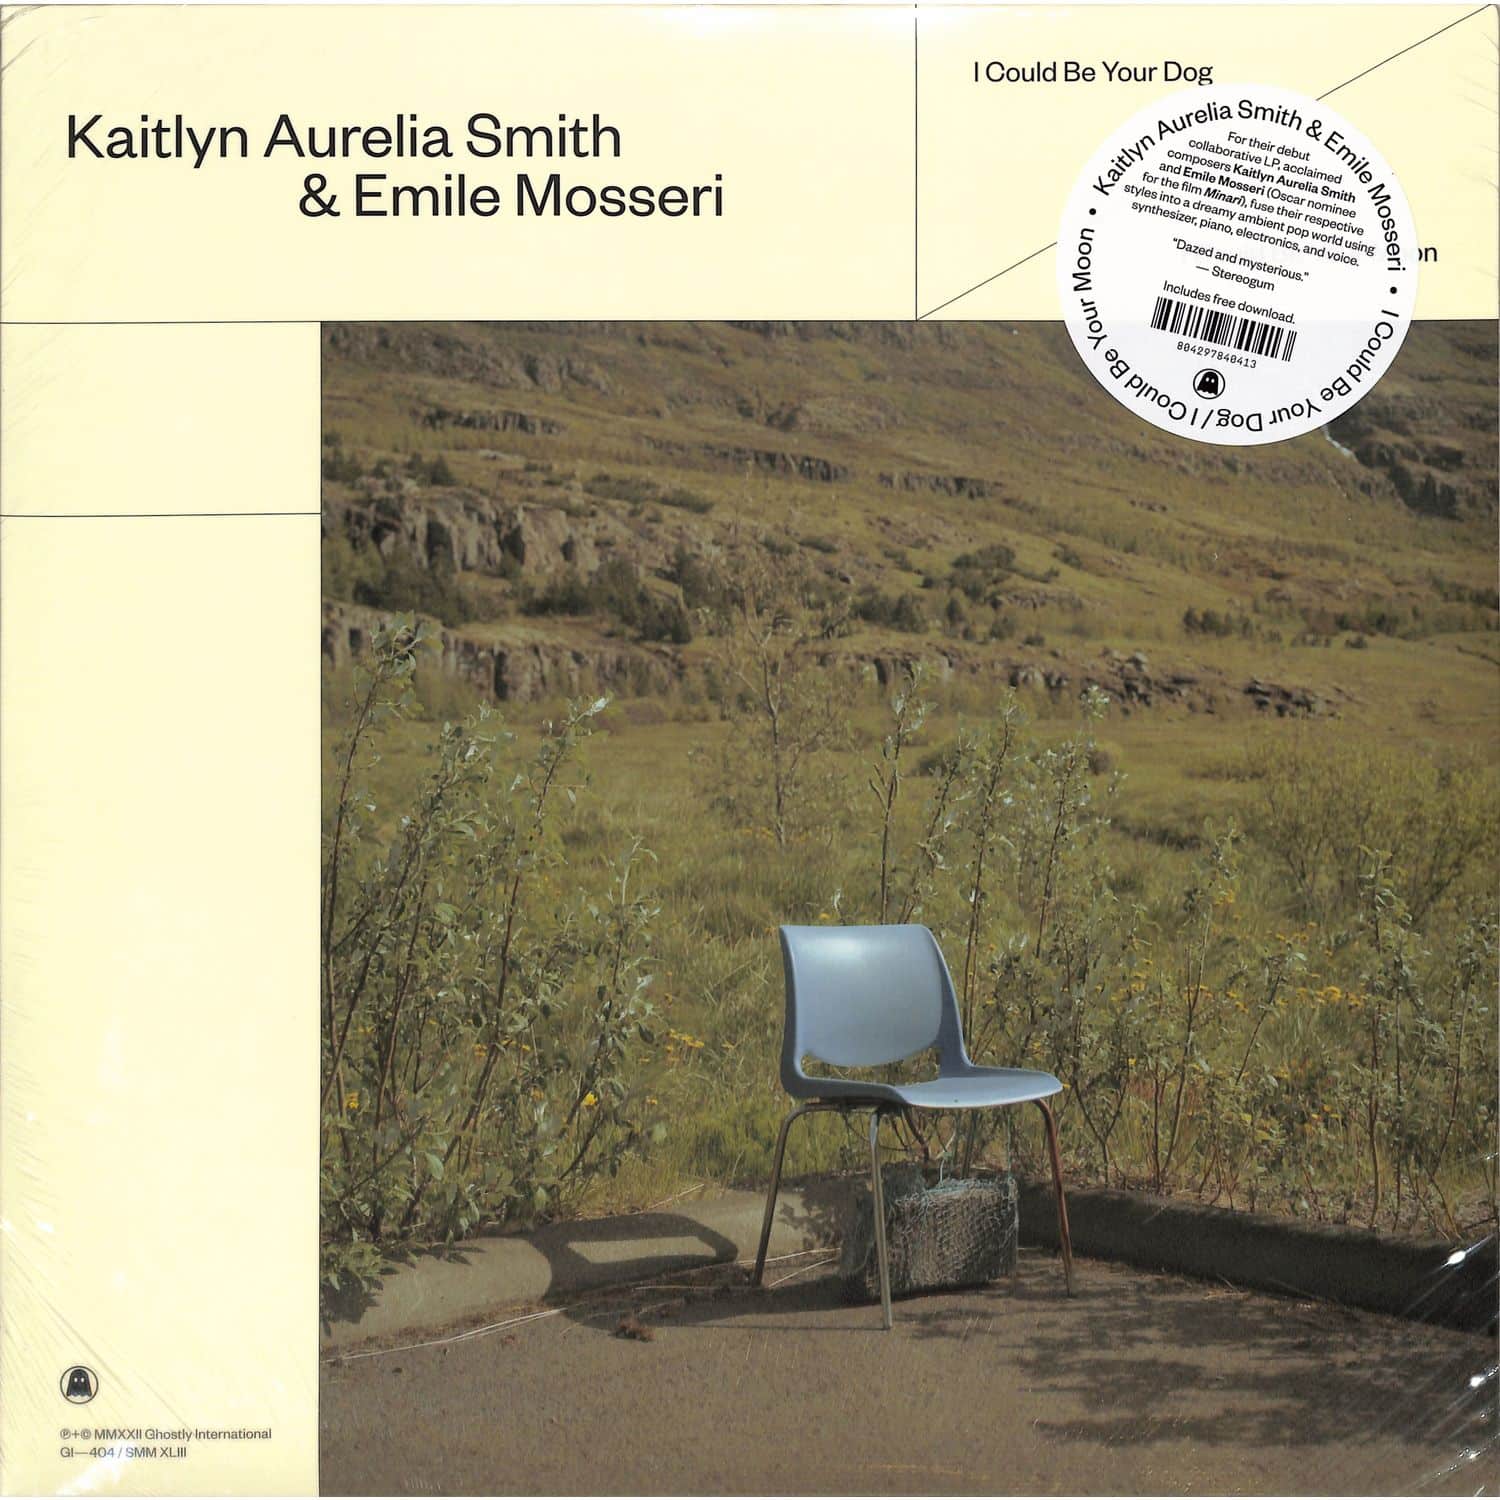 Kaitlyn Aurelia Smith & Emile Mosseri - I COULD BE YOUR DOG / I COULD BE YOUR MOON 